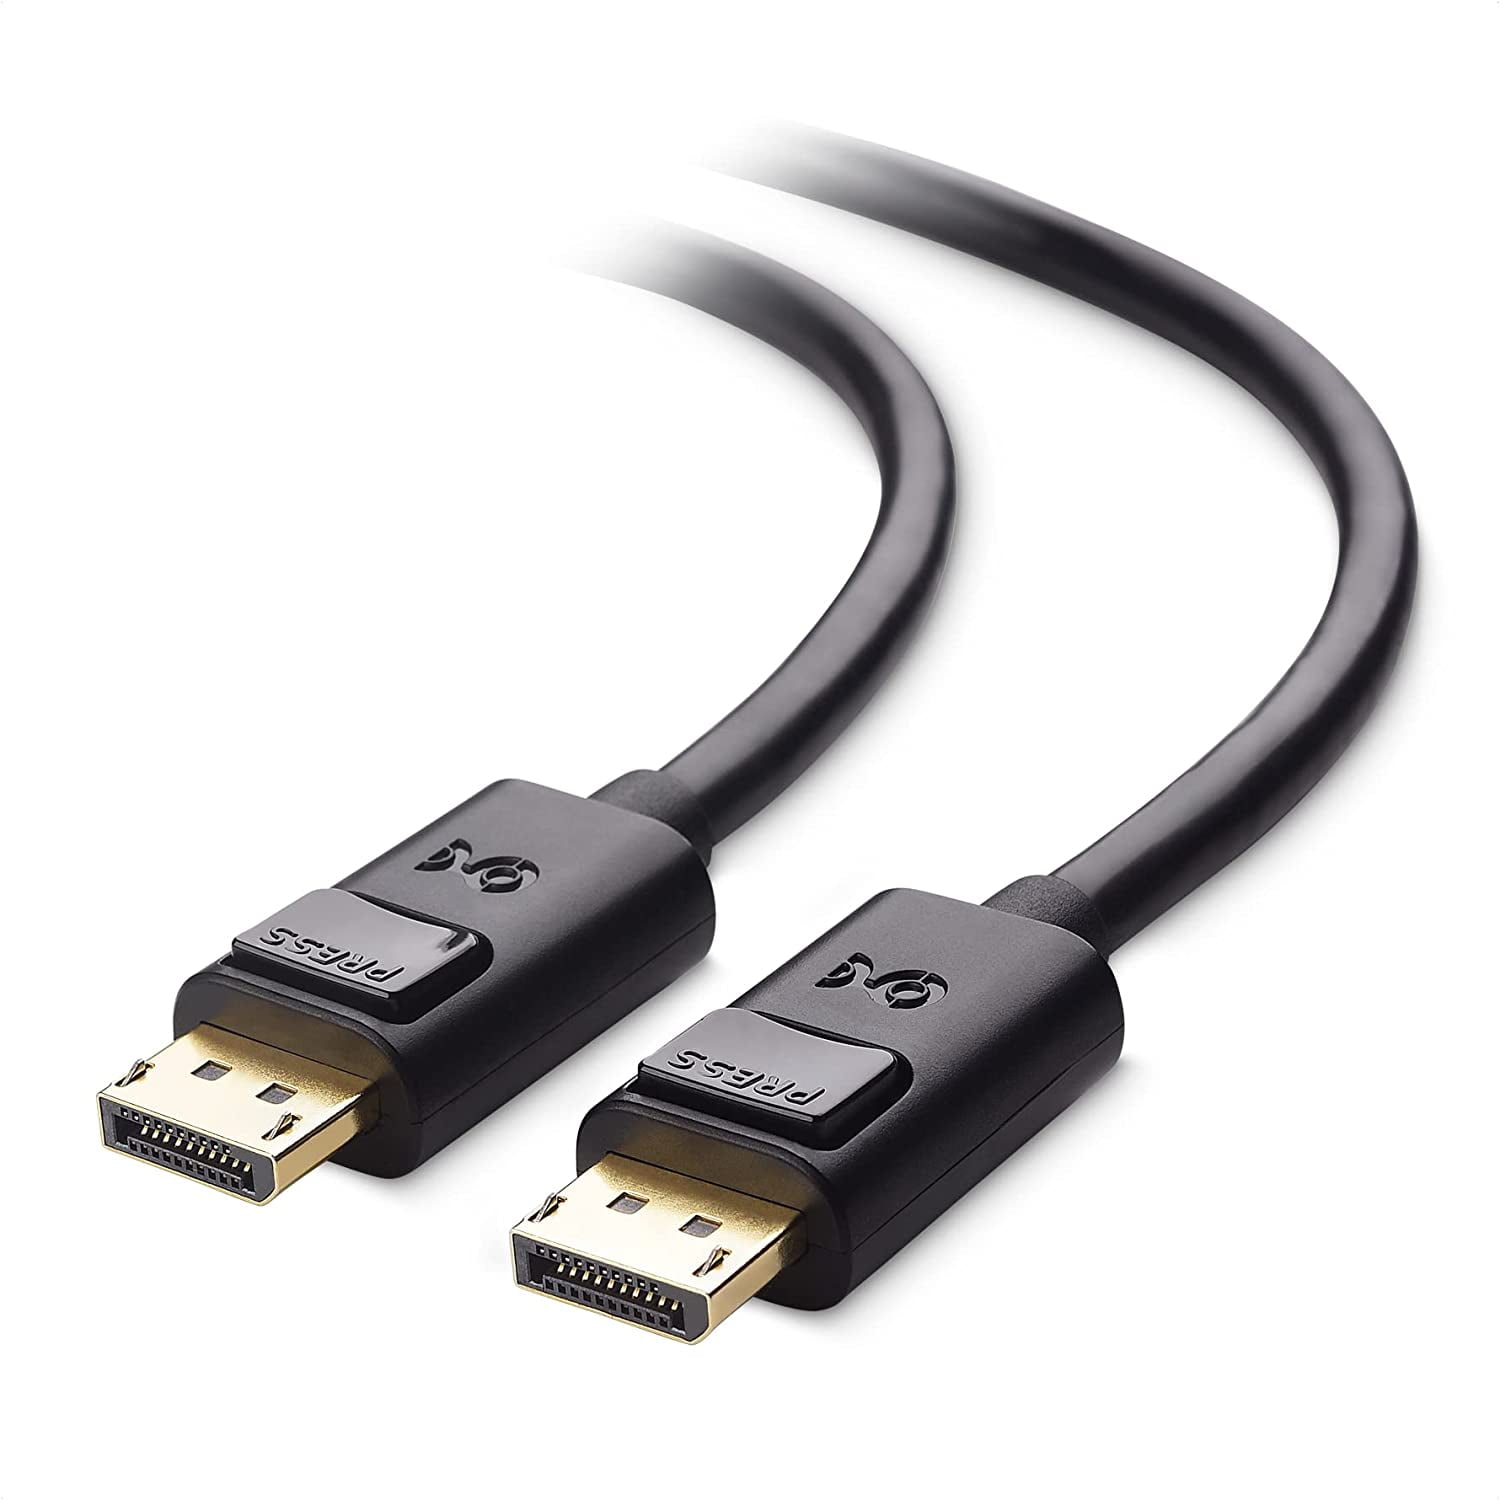 4K Resolution Ready DP to DP Cable 6 Feet Cable Matters 2-Pack DisplayPort to DisplayPort Cable 